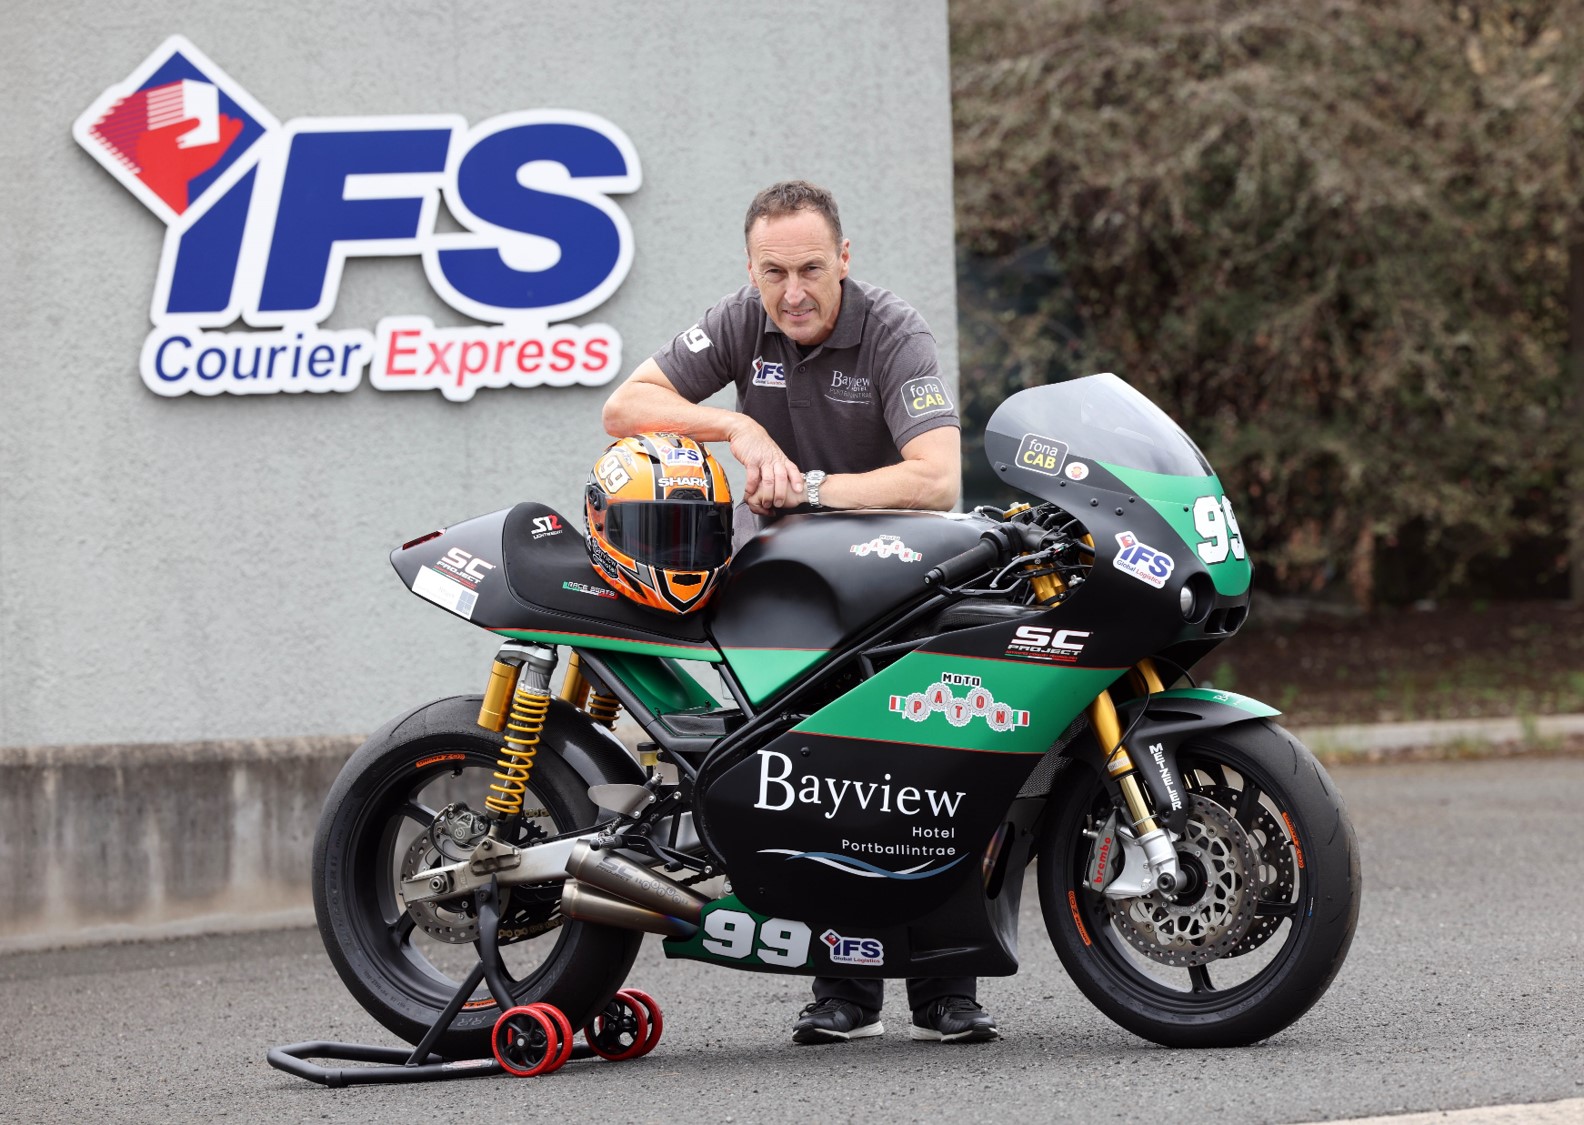 Paton Factor For McWilliams Latest NW200 Charge